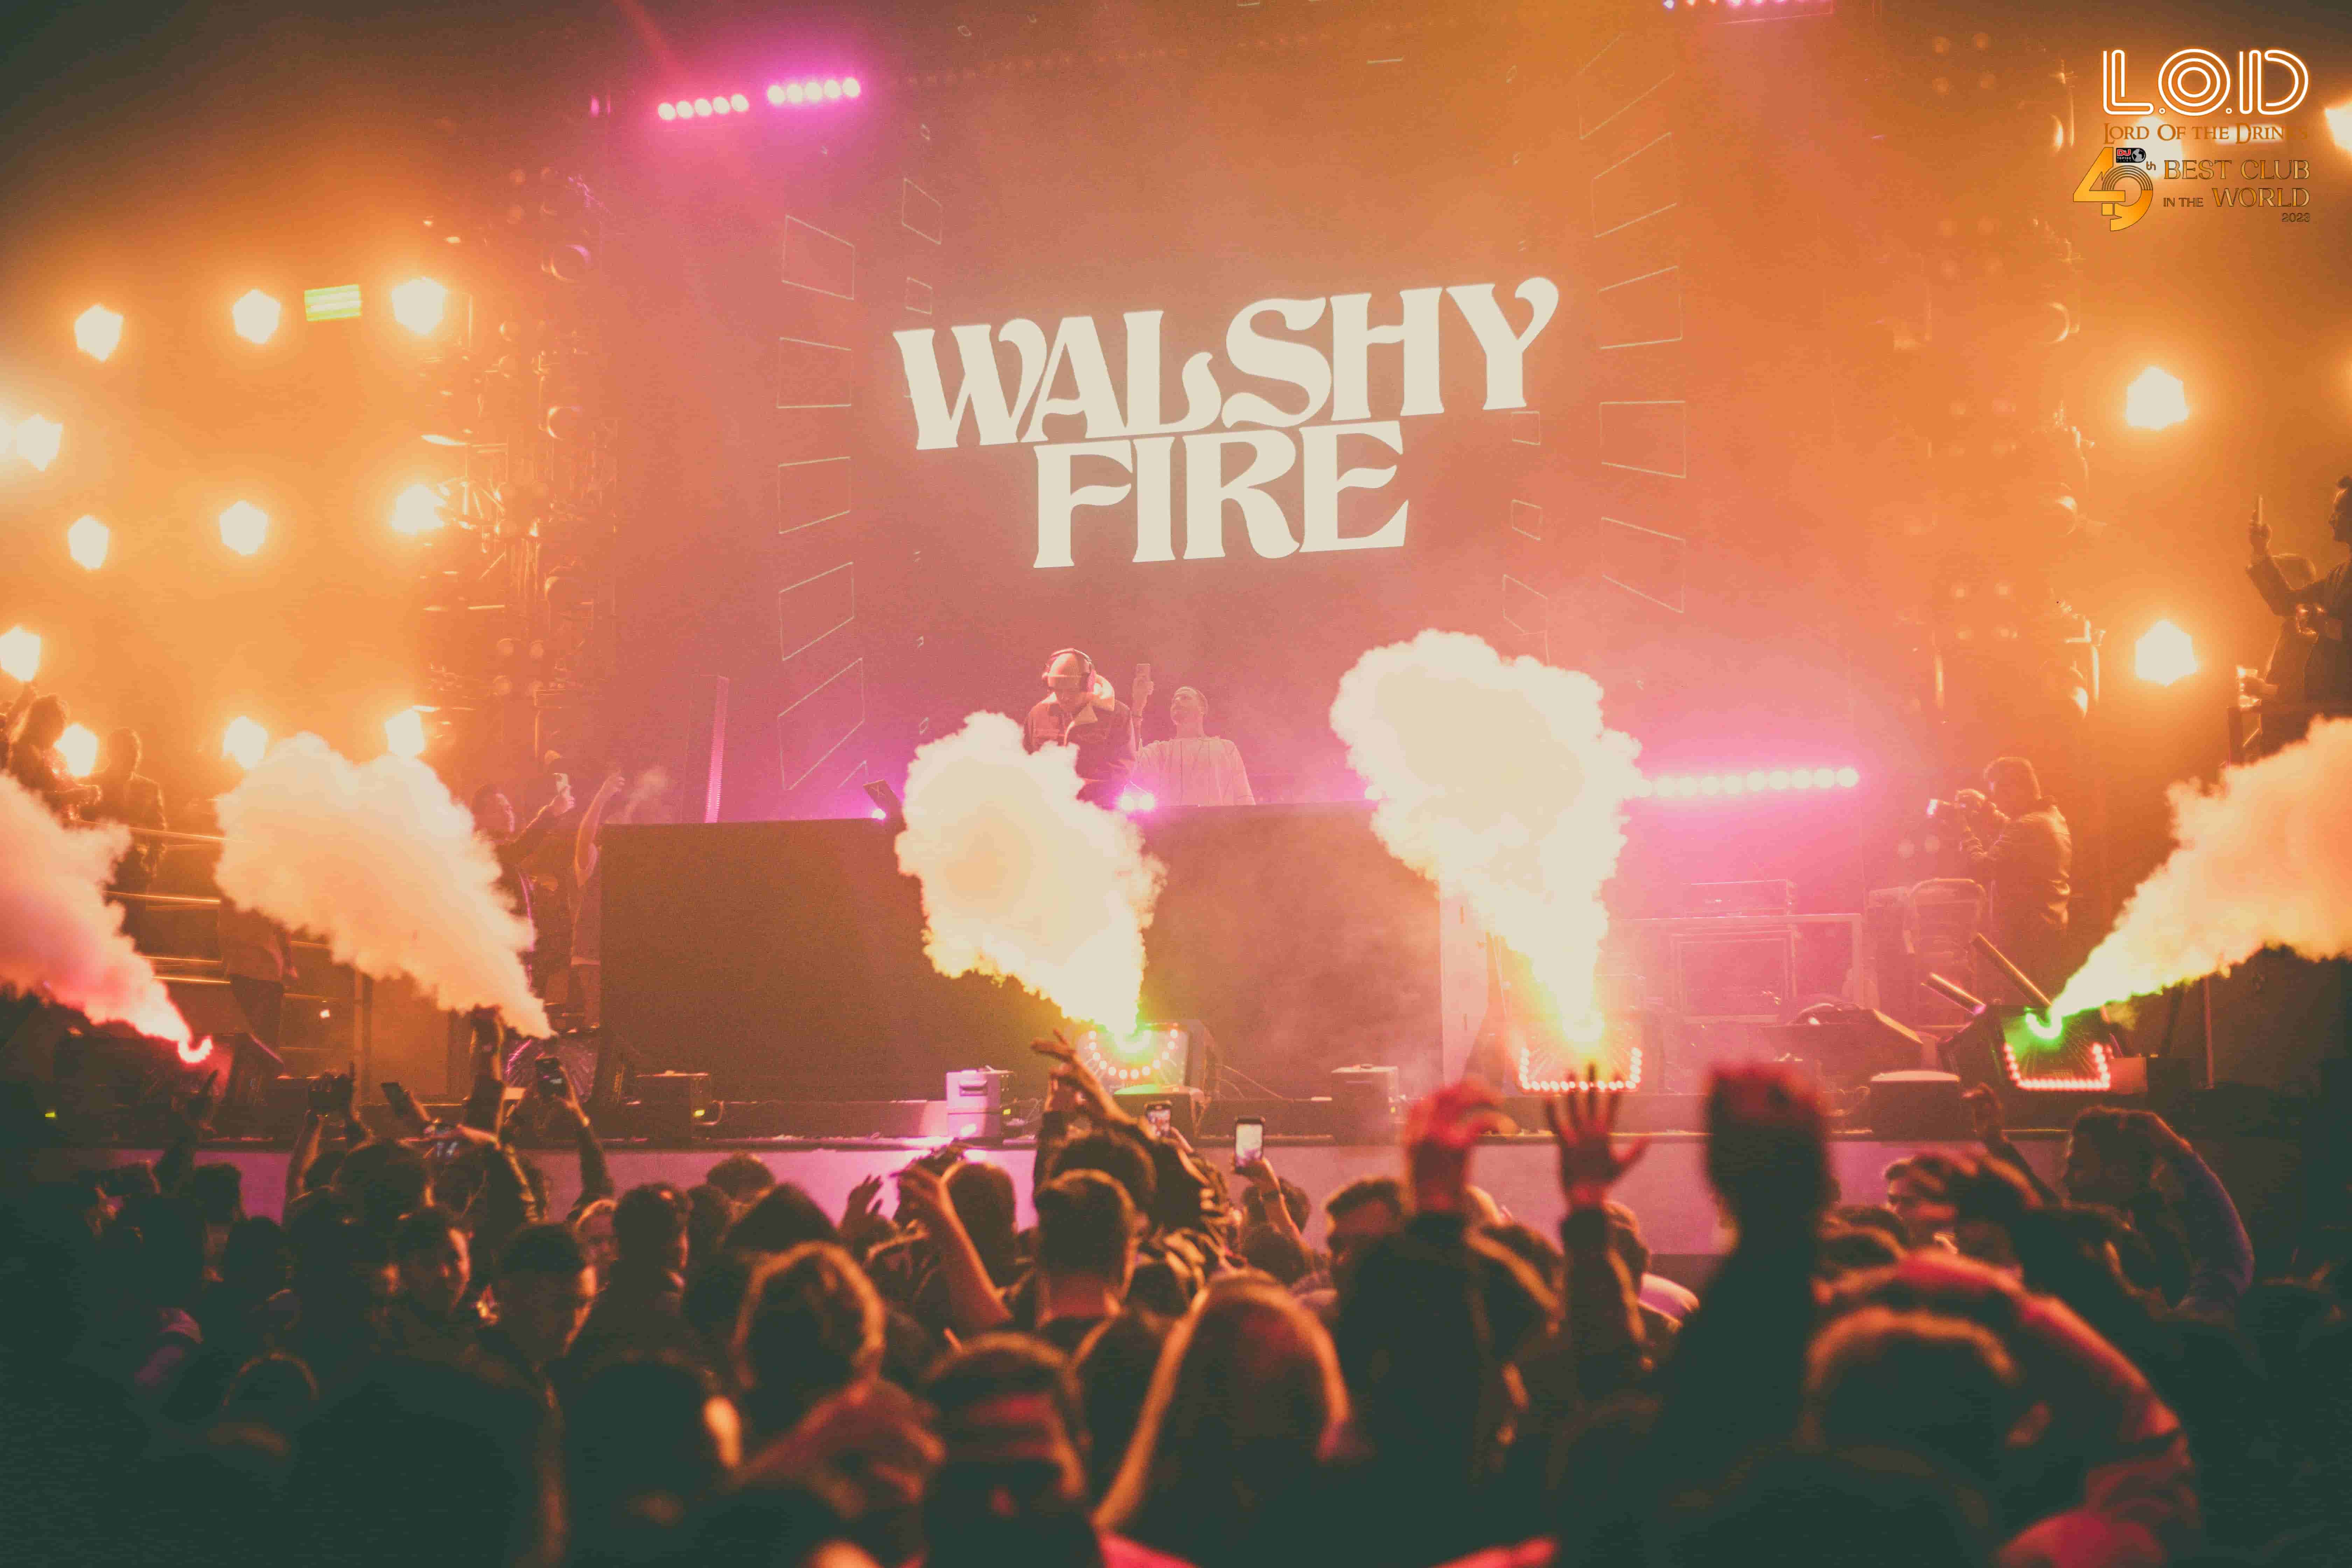 Wednesday Night February 21st [WALSHY FIRE]-65d833c6bbe9a-3